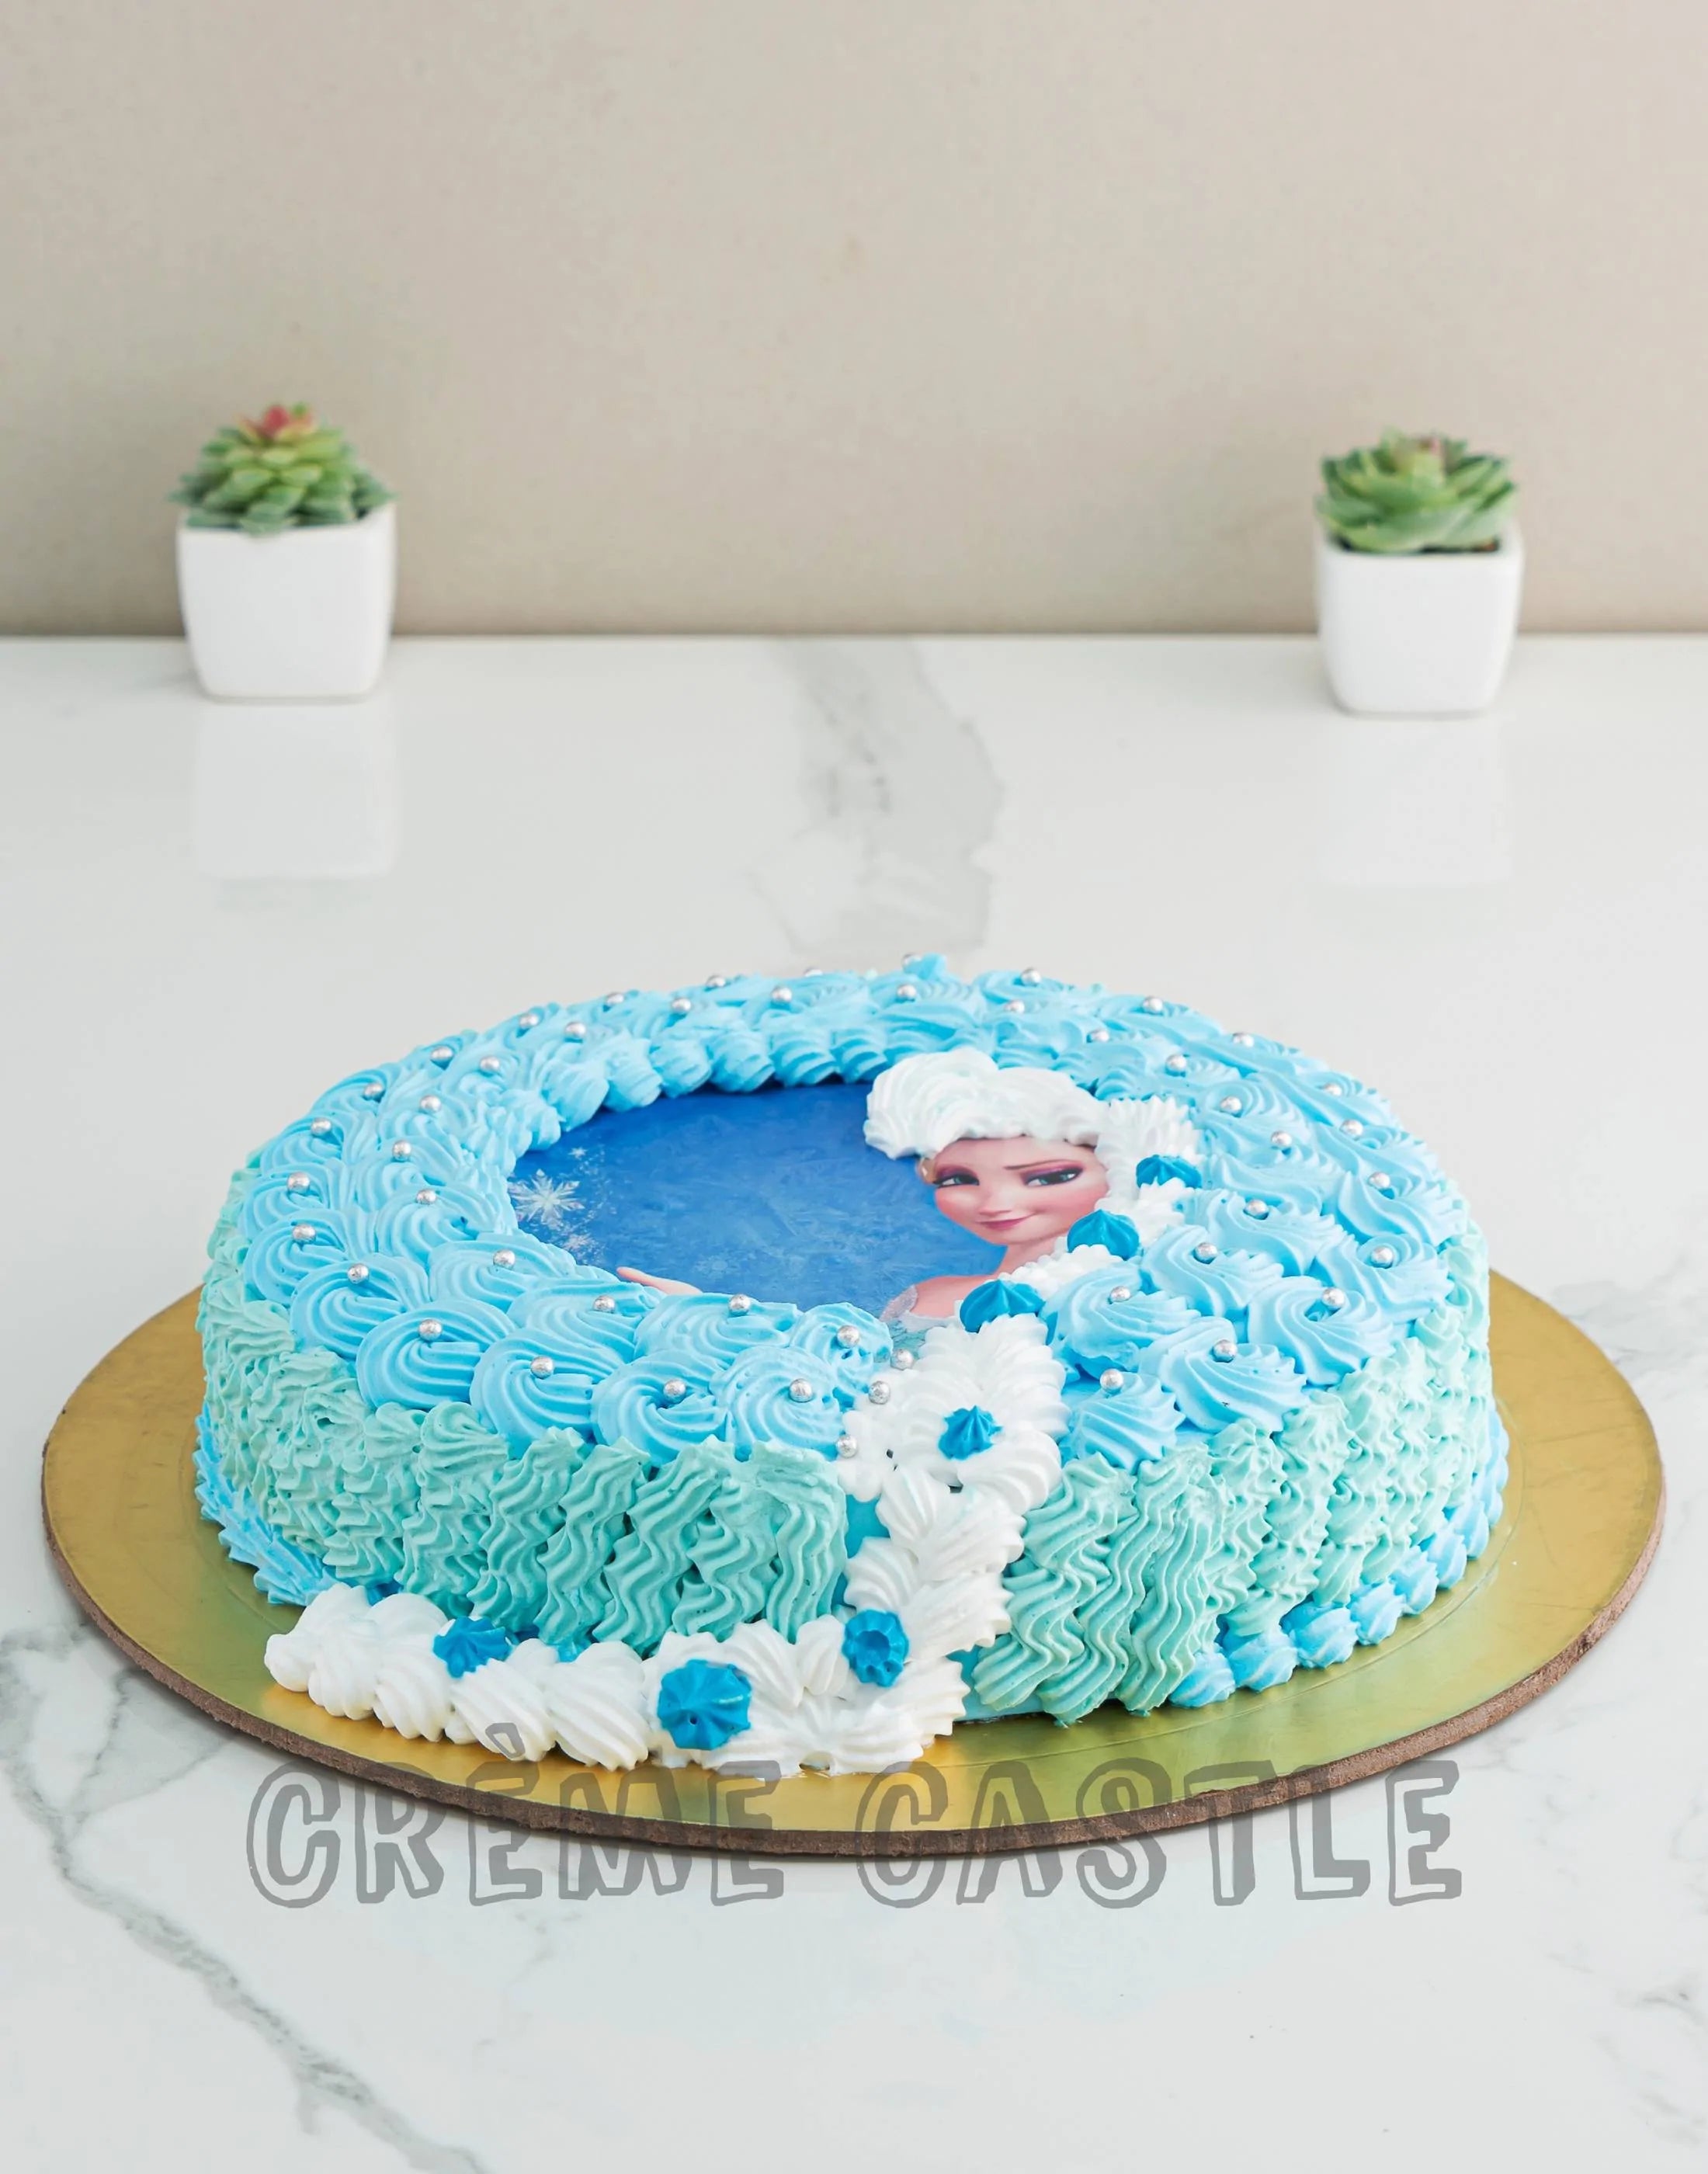 Pretty cake decorating designs we've bookmarked : Little snow flakes Frozen  Cake